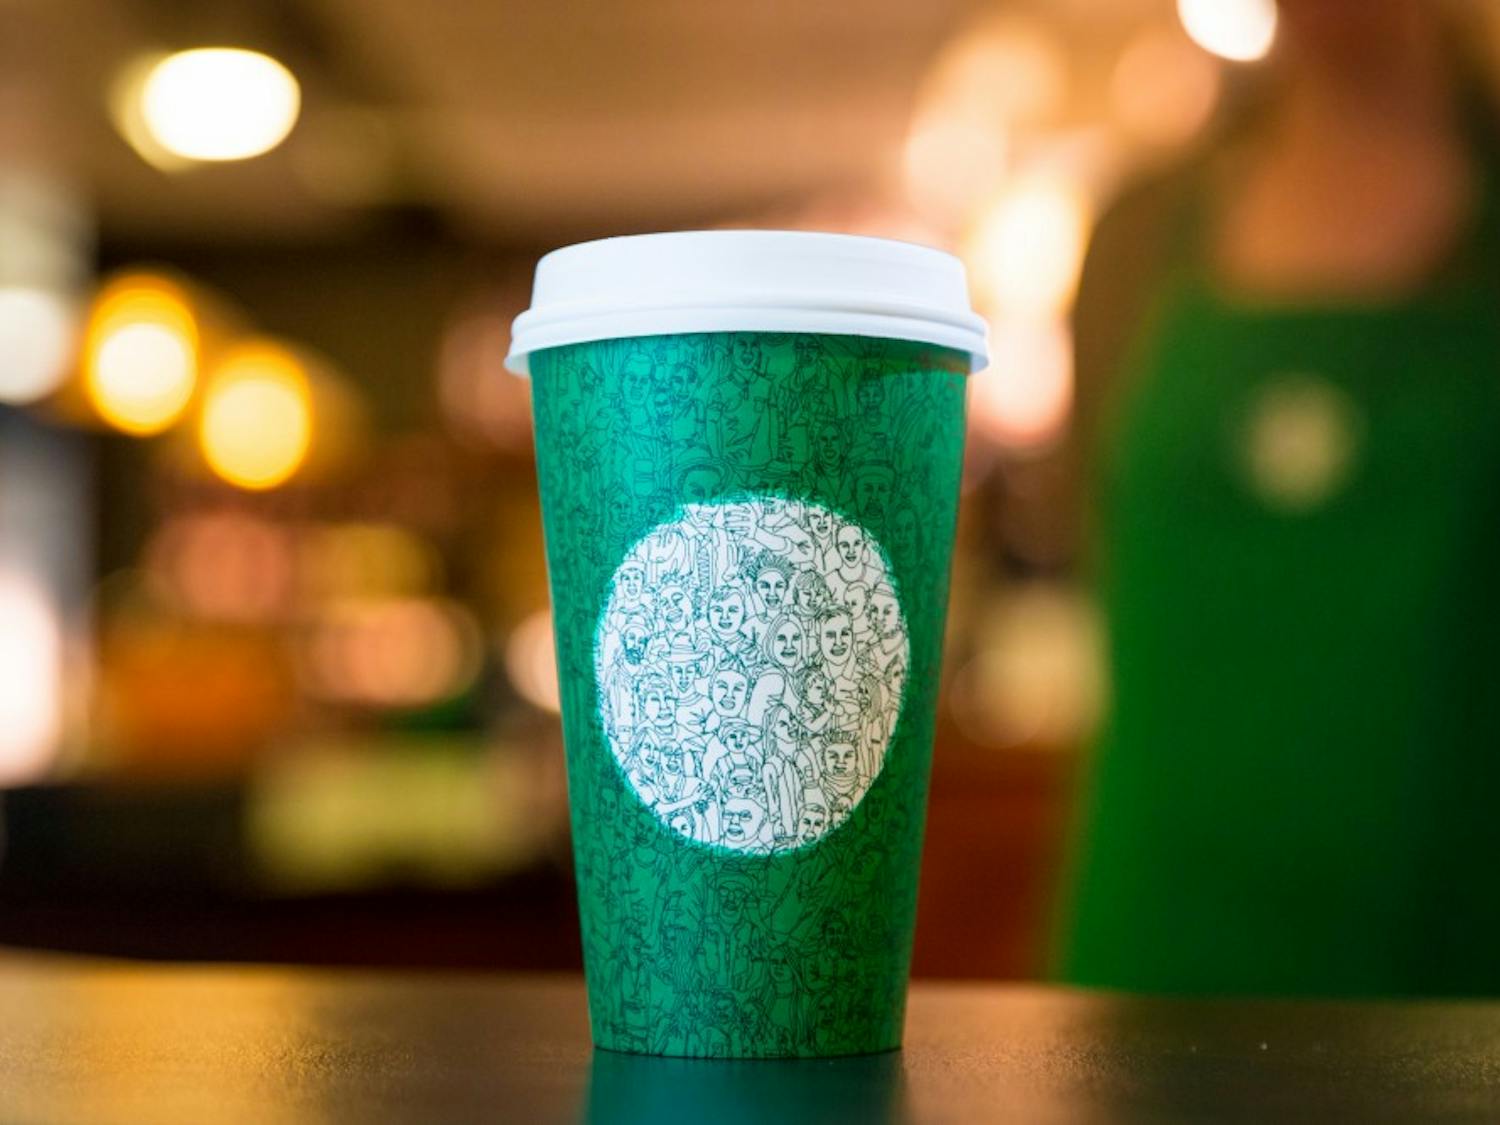 The illustration on the green Starbucks cup was drawn in one continuous stroke.